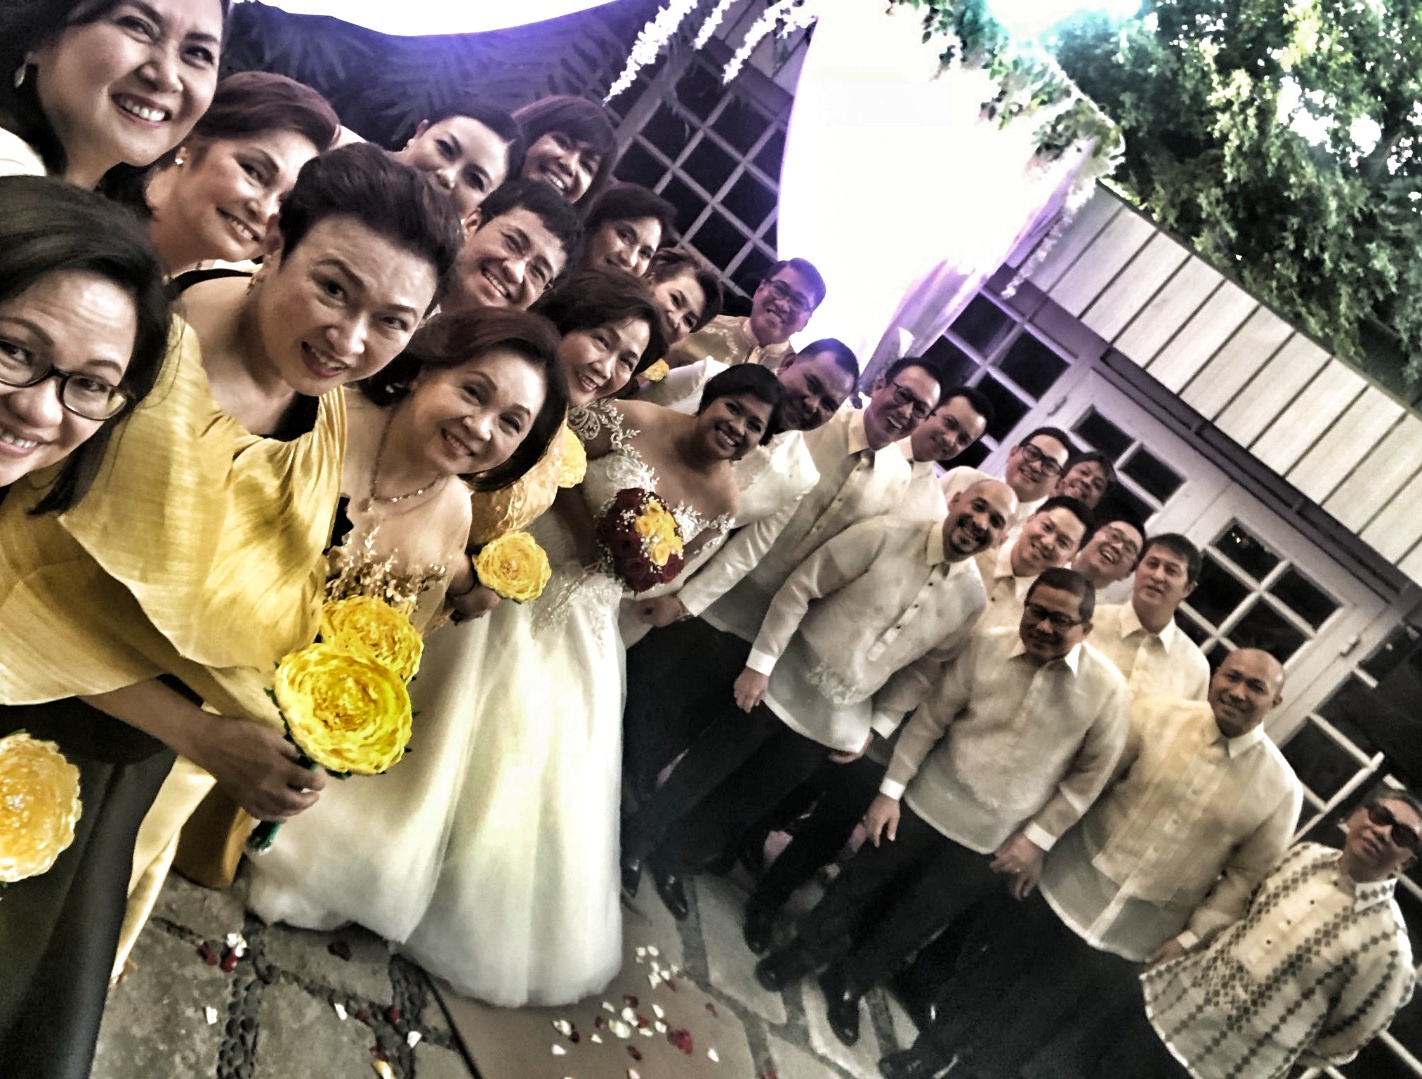 Jover Laurio a.k.a. @PinoyAkoBlog’s wedding a who’s-who of diminished and DEFEATED Opposition politicians